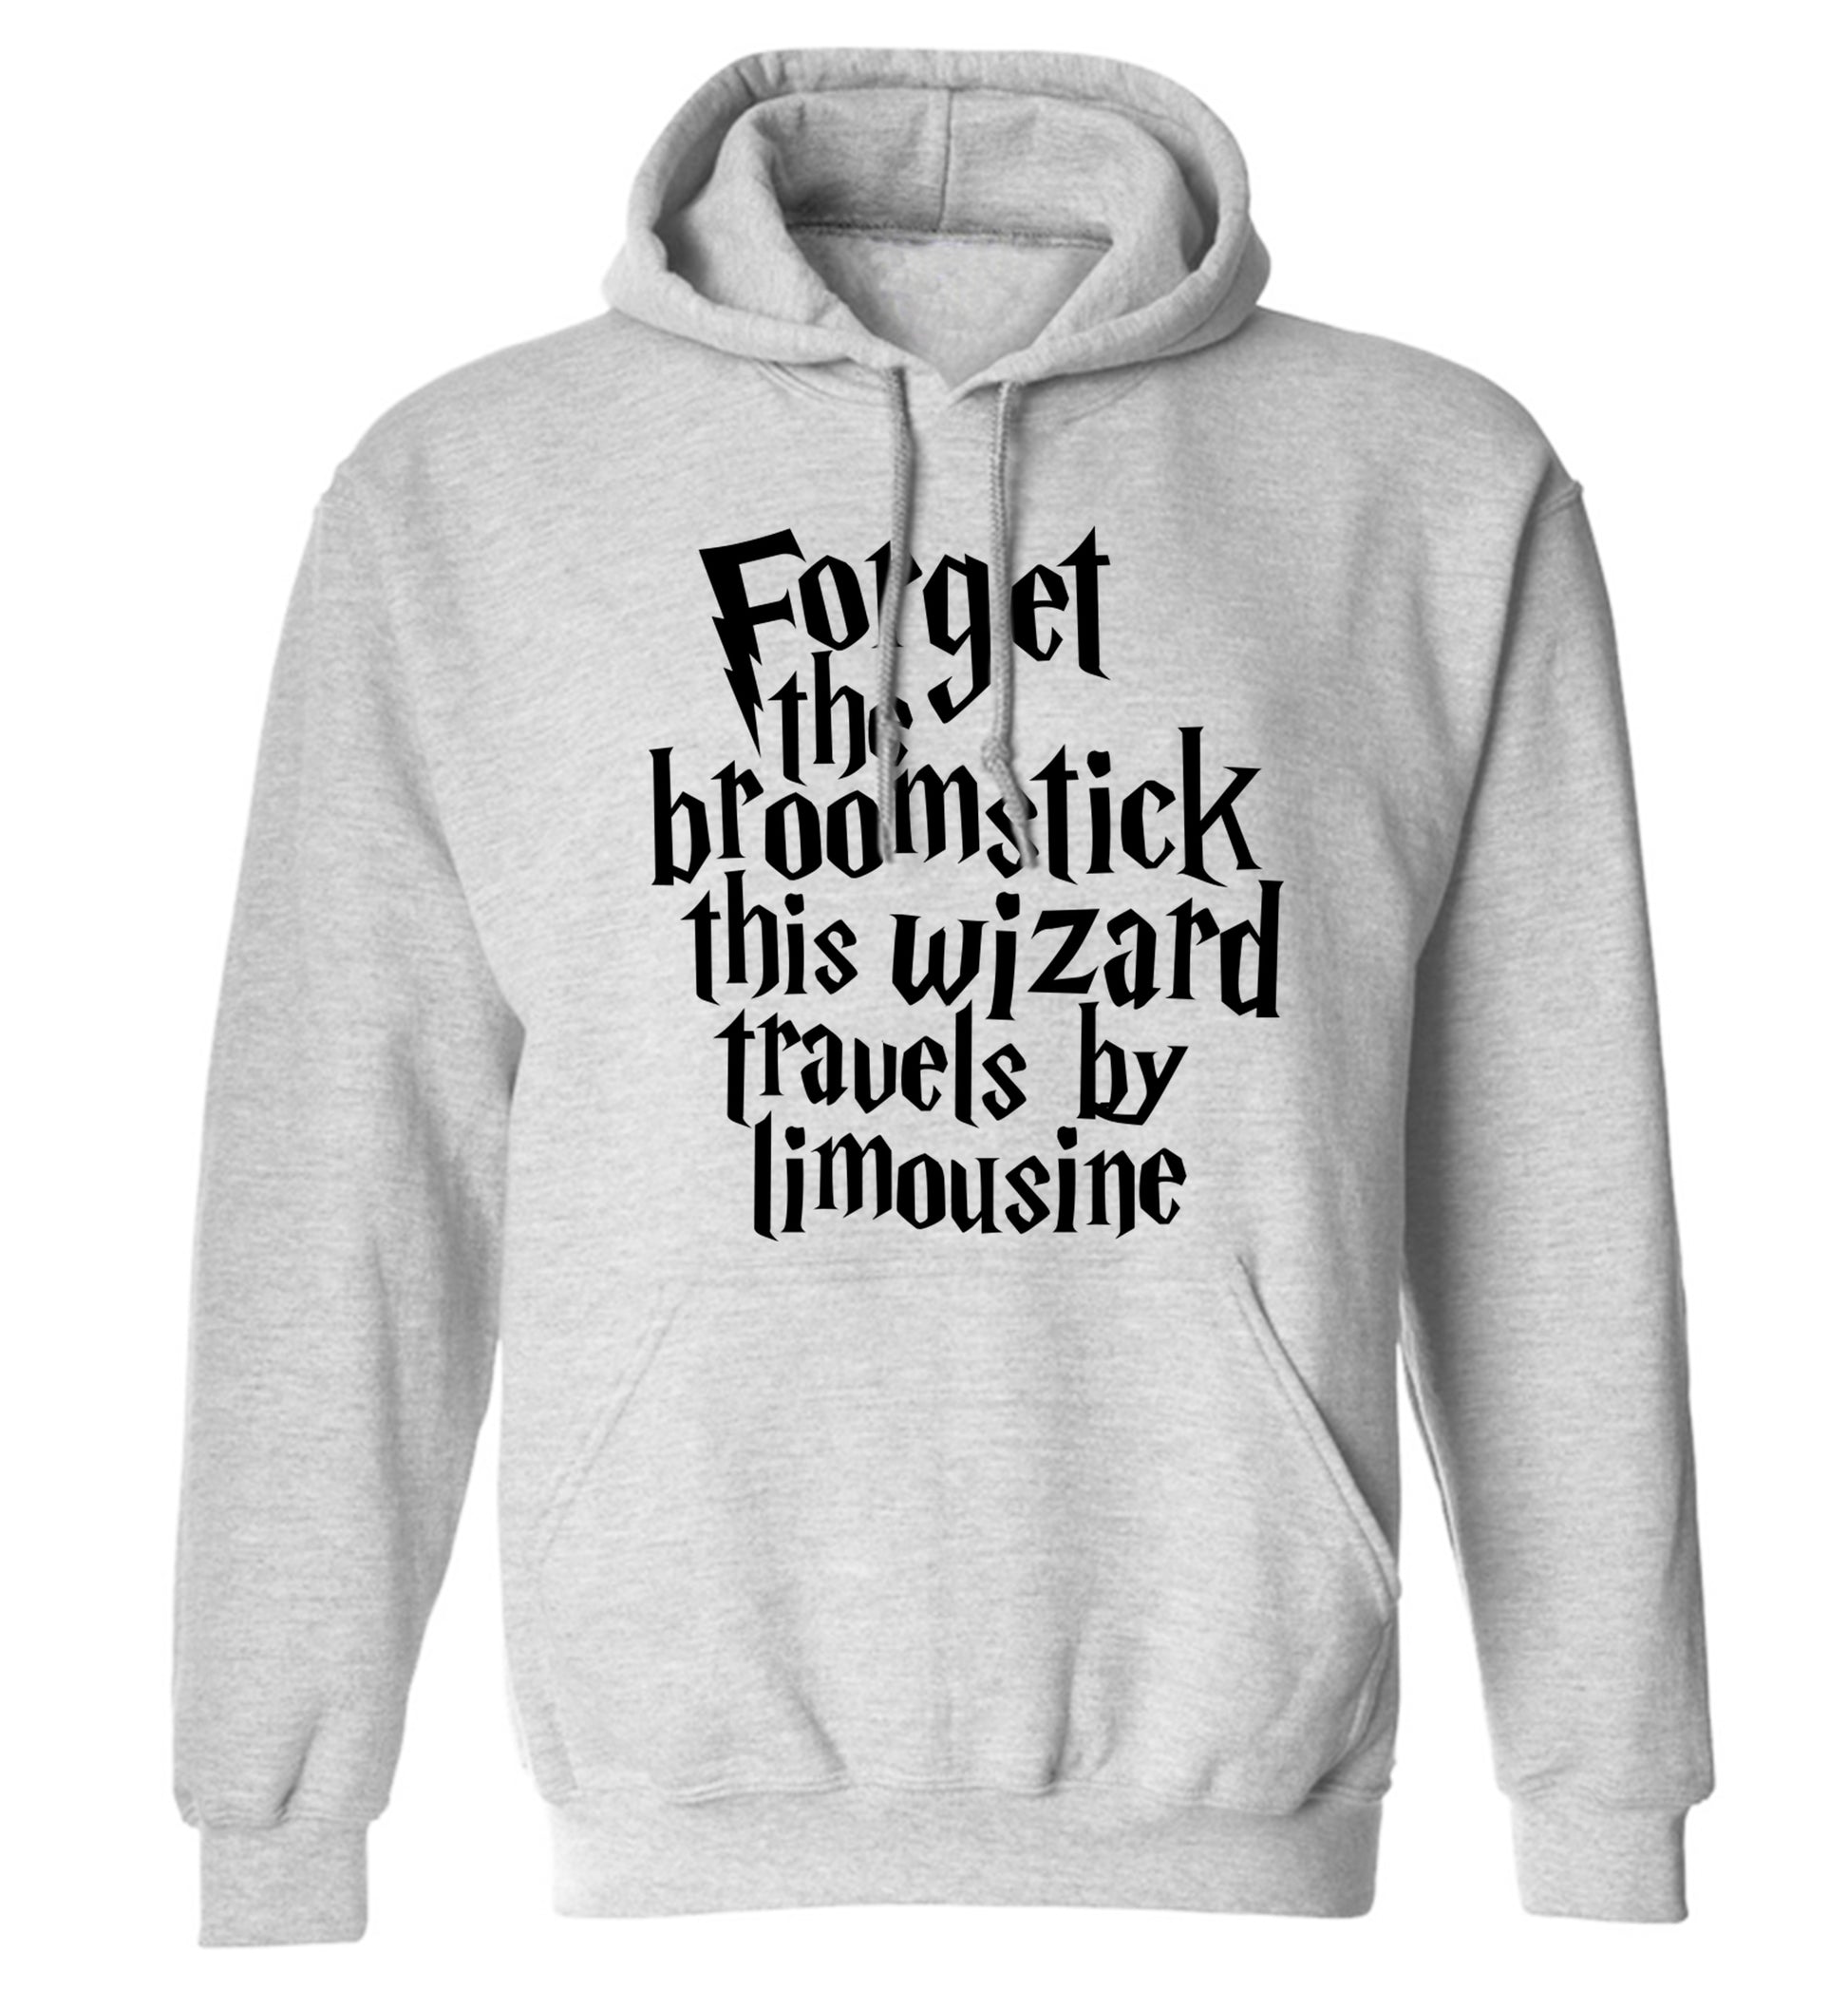 Forget the broomstick this wizard travels by limousine adults unisexgrey hoodie 2XL